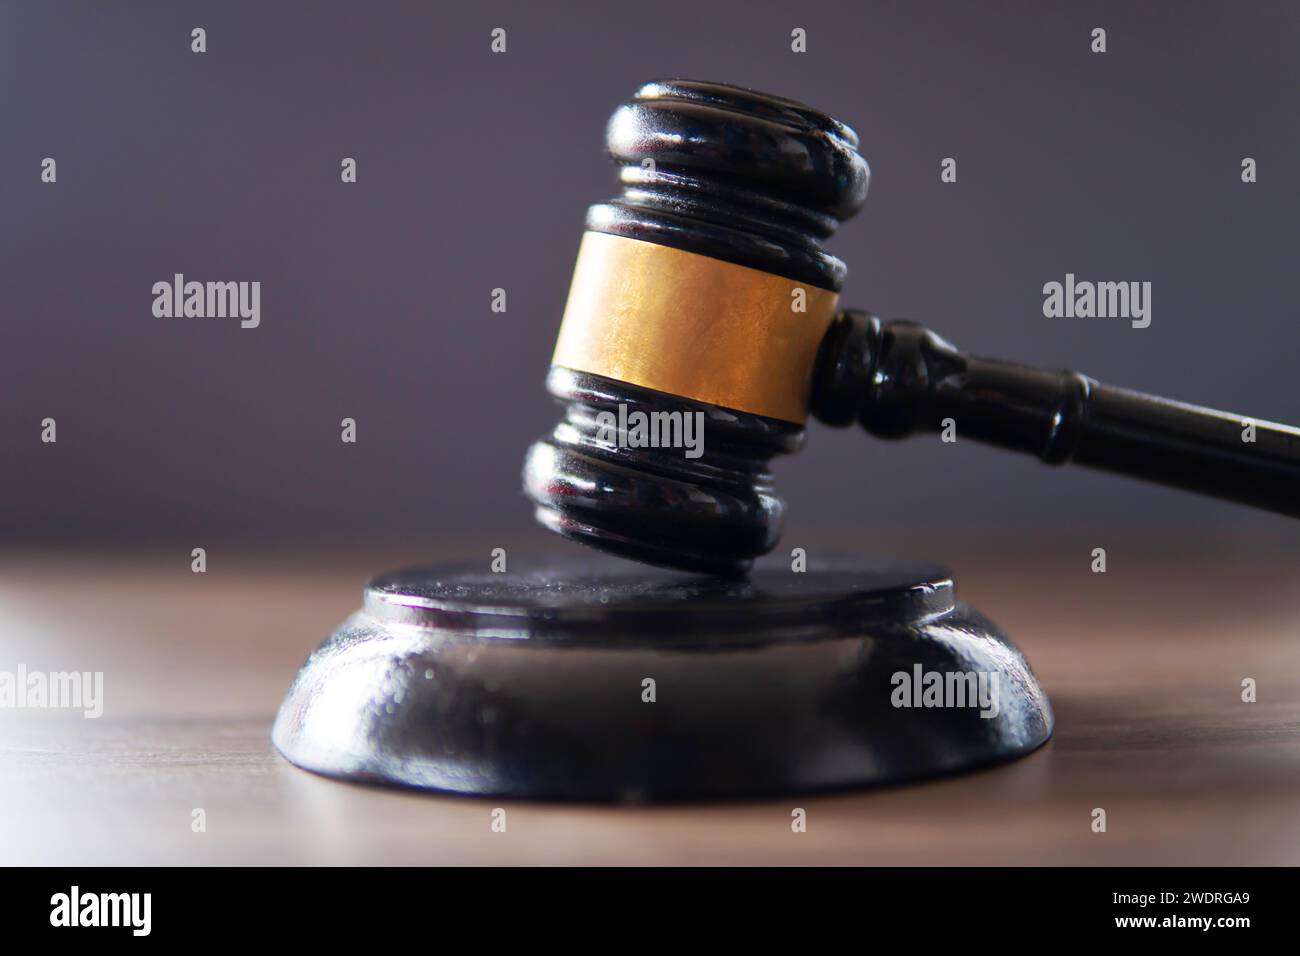 Closeup image of judge gavel on dark background. Law and justice concept. Stock Photo